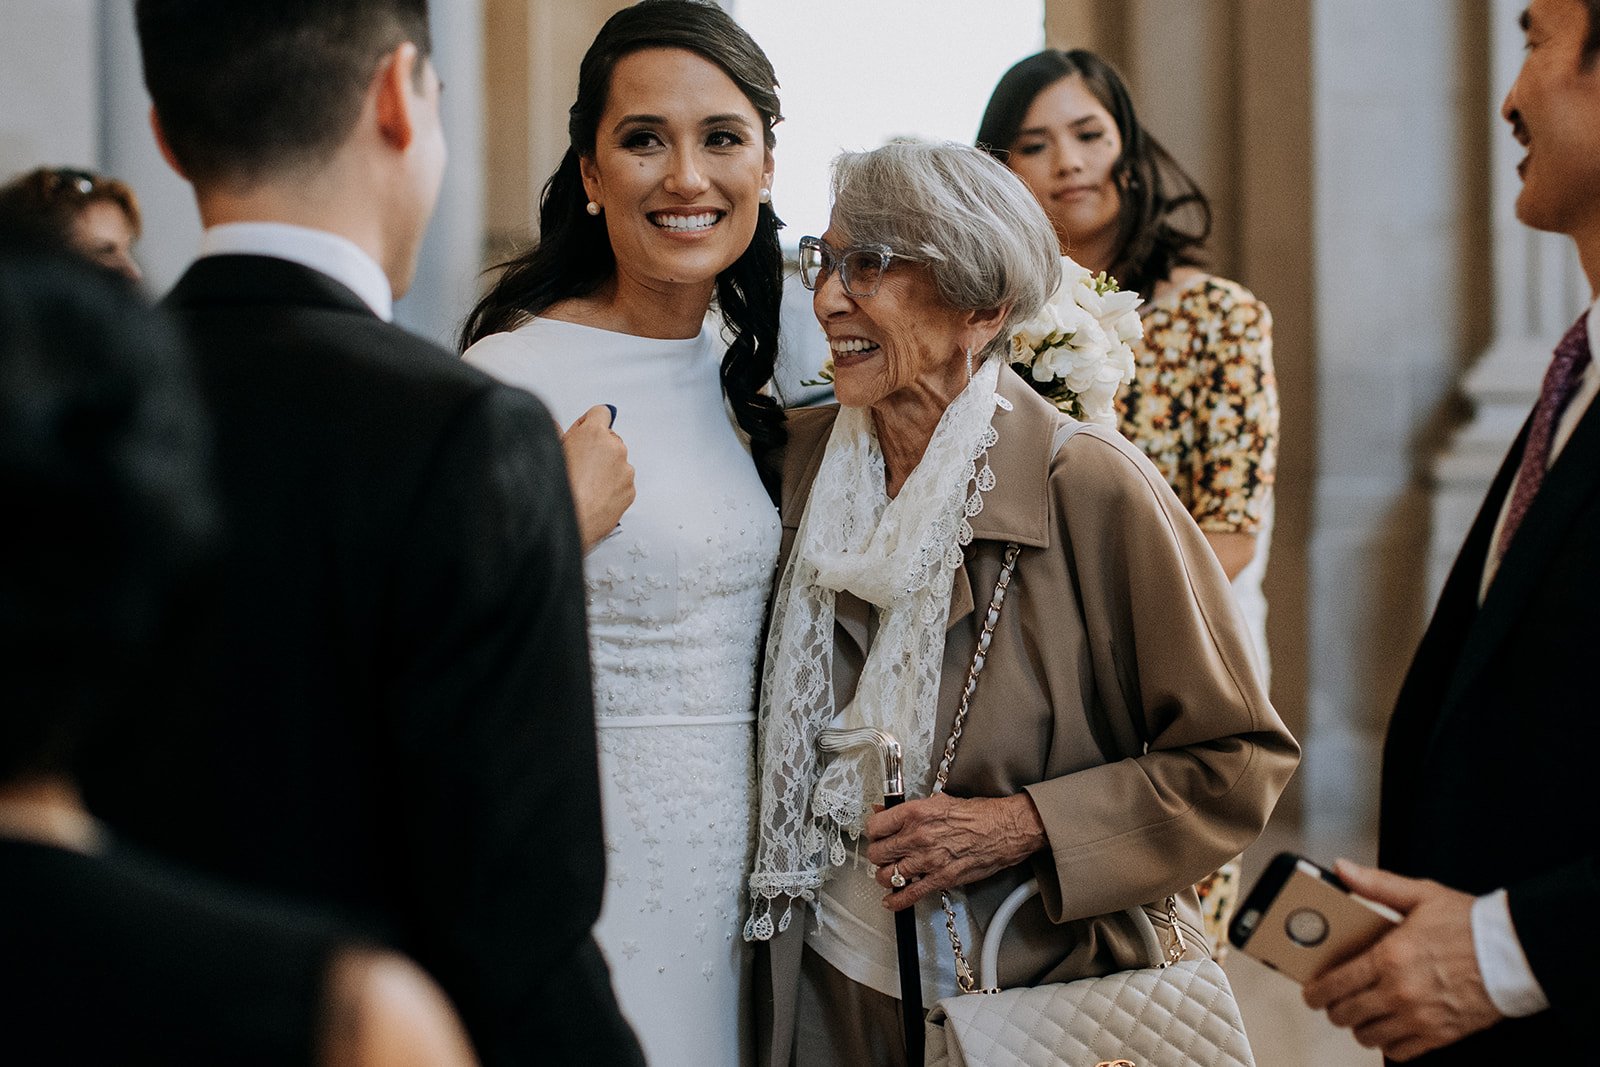  bride smiling with elderly woman  